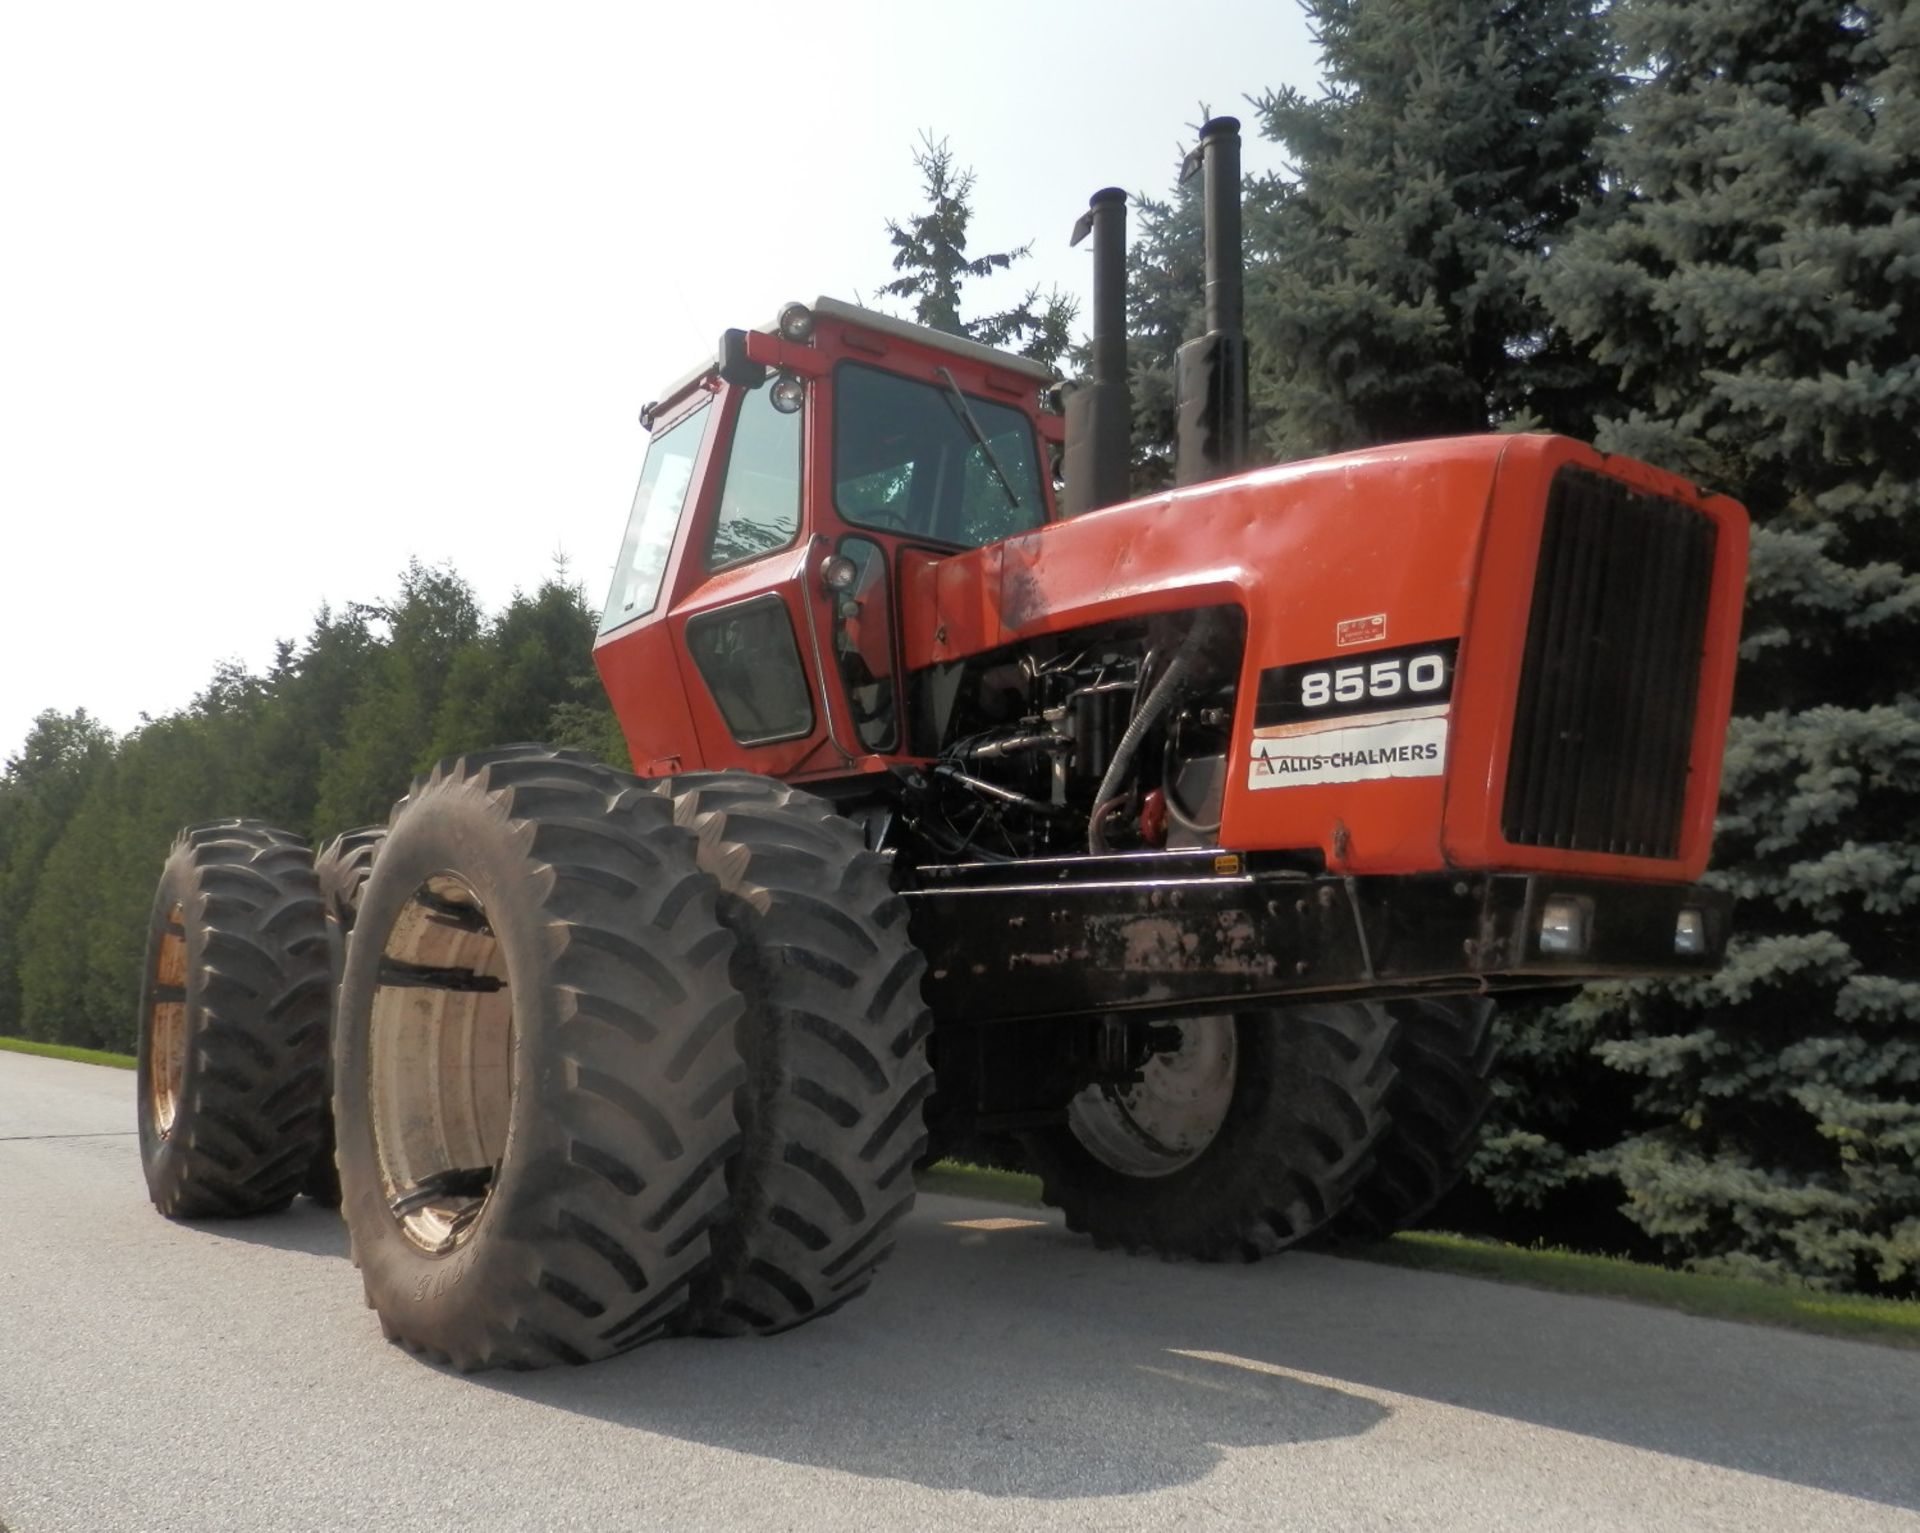 ALLIS CHALMERS 8550 4x4 TRACTOR-SN 1402 - Image 20 of 20